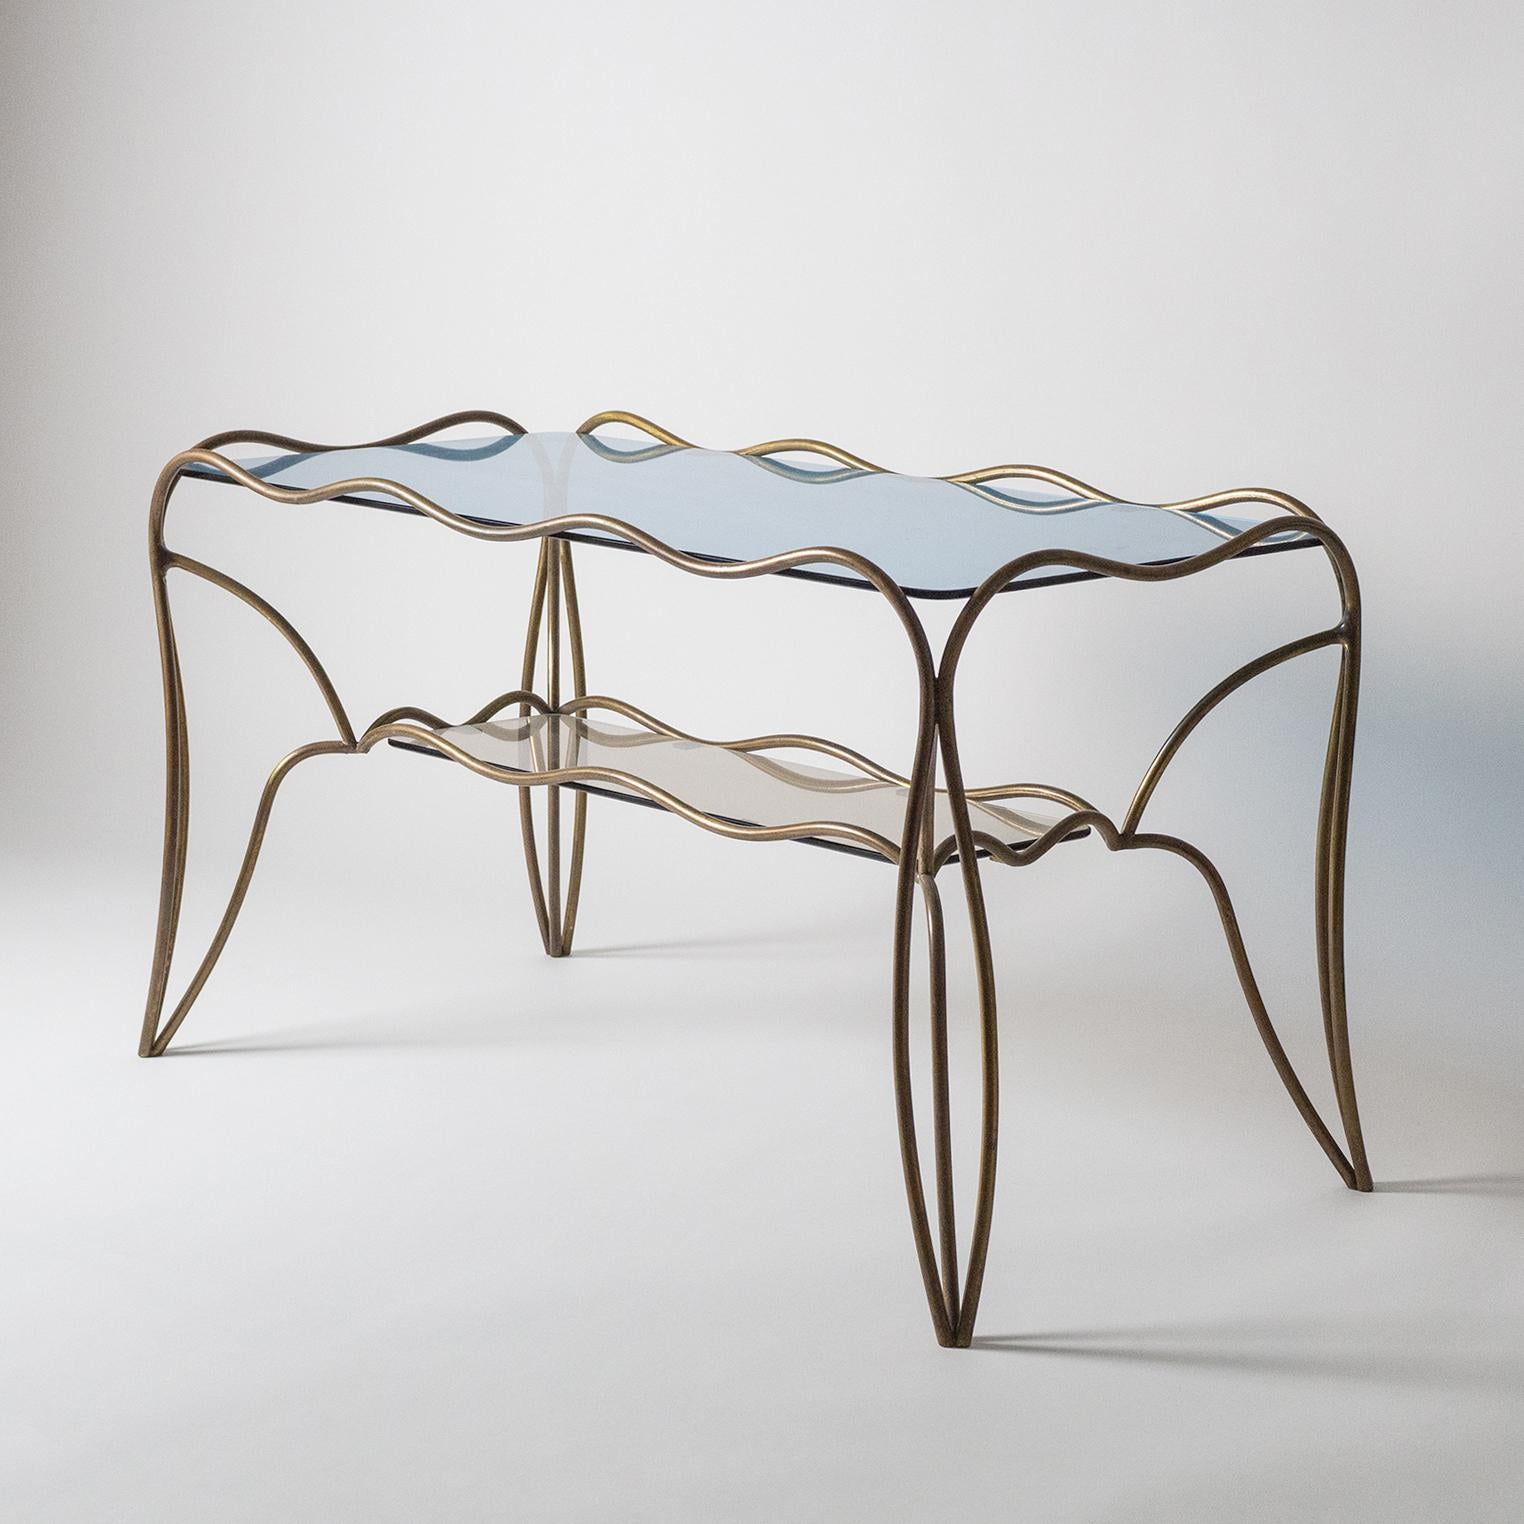 Very unique midcentury Italian cocktail or side table in brass with dual colored glass tops. The frame is made of an intricate structure of ondulating brass with a blue glass top and a bronze colored glass on the second level. A very exceptional